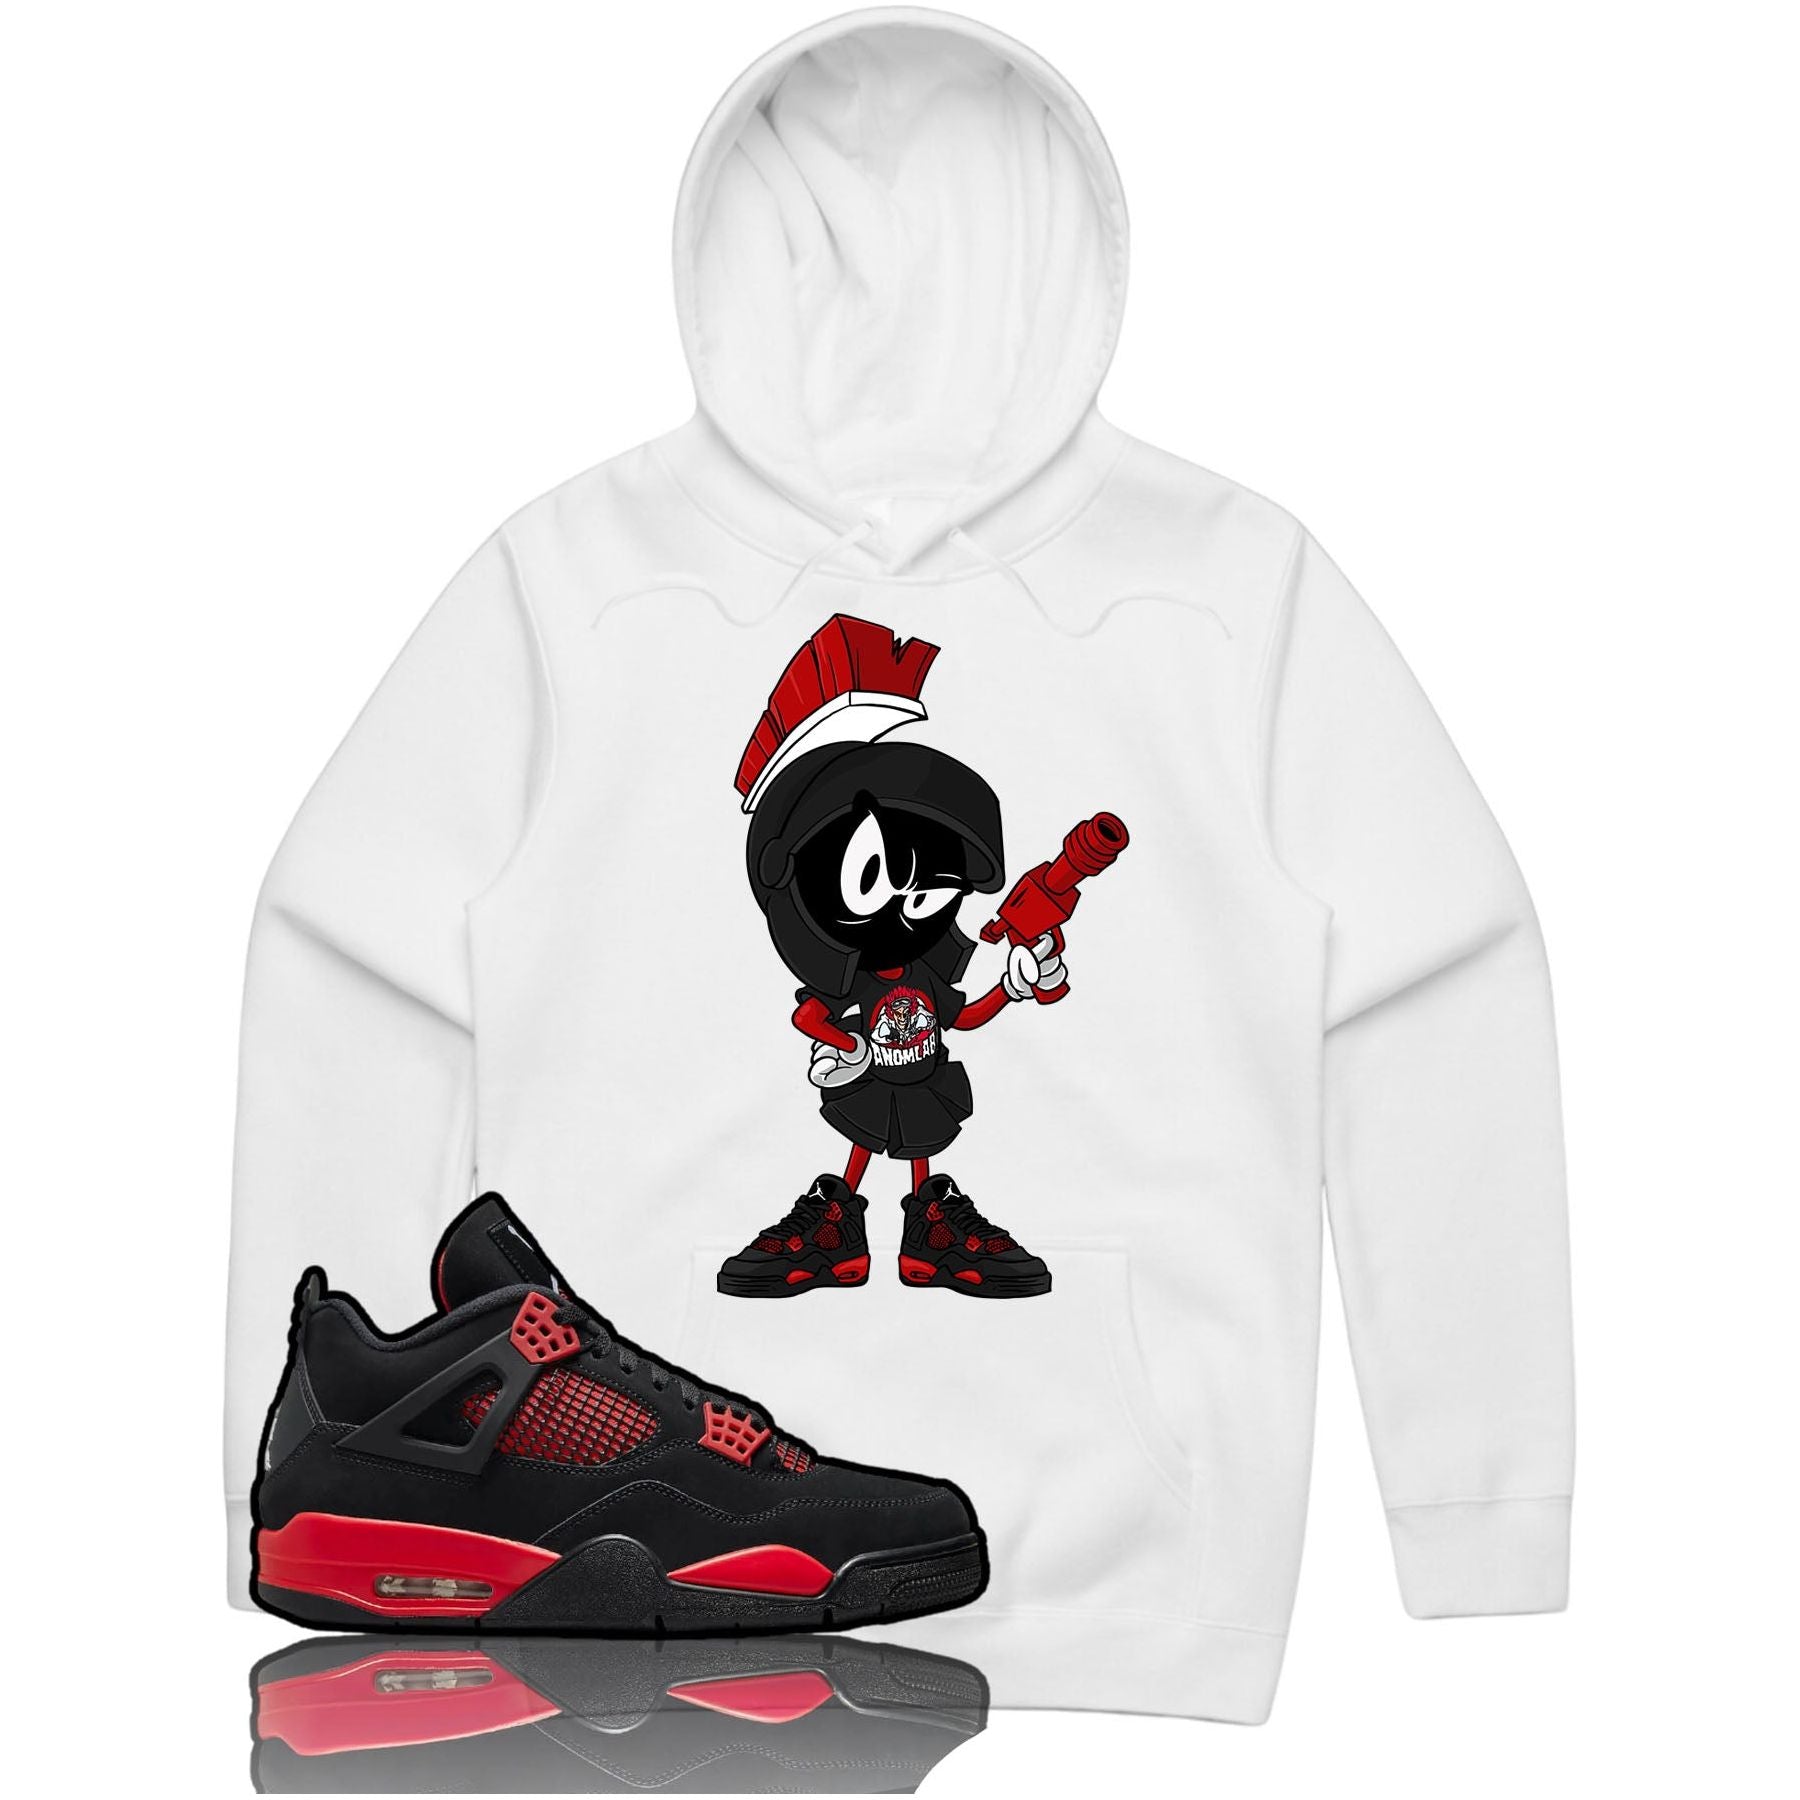 THE MARTIAN HOODIE-J4 RED THUNDER-BLK &amp; WHT